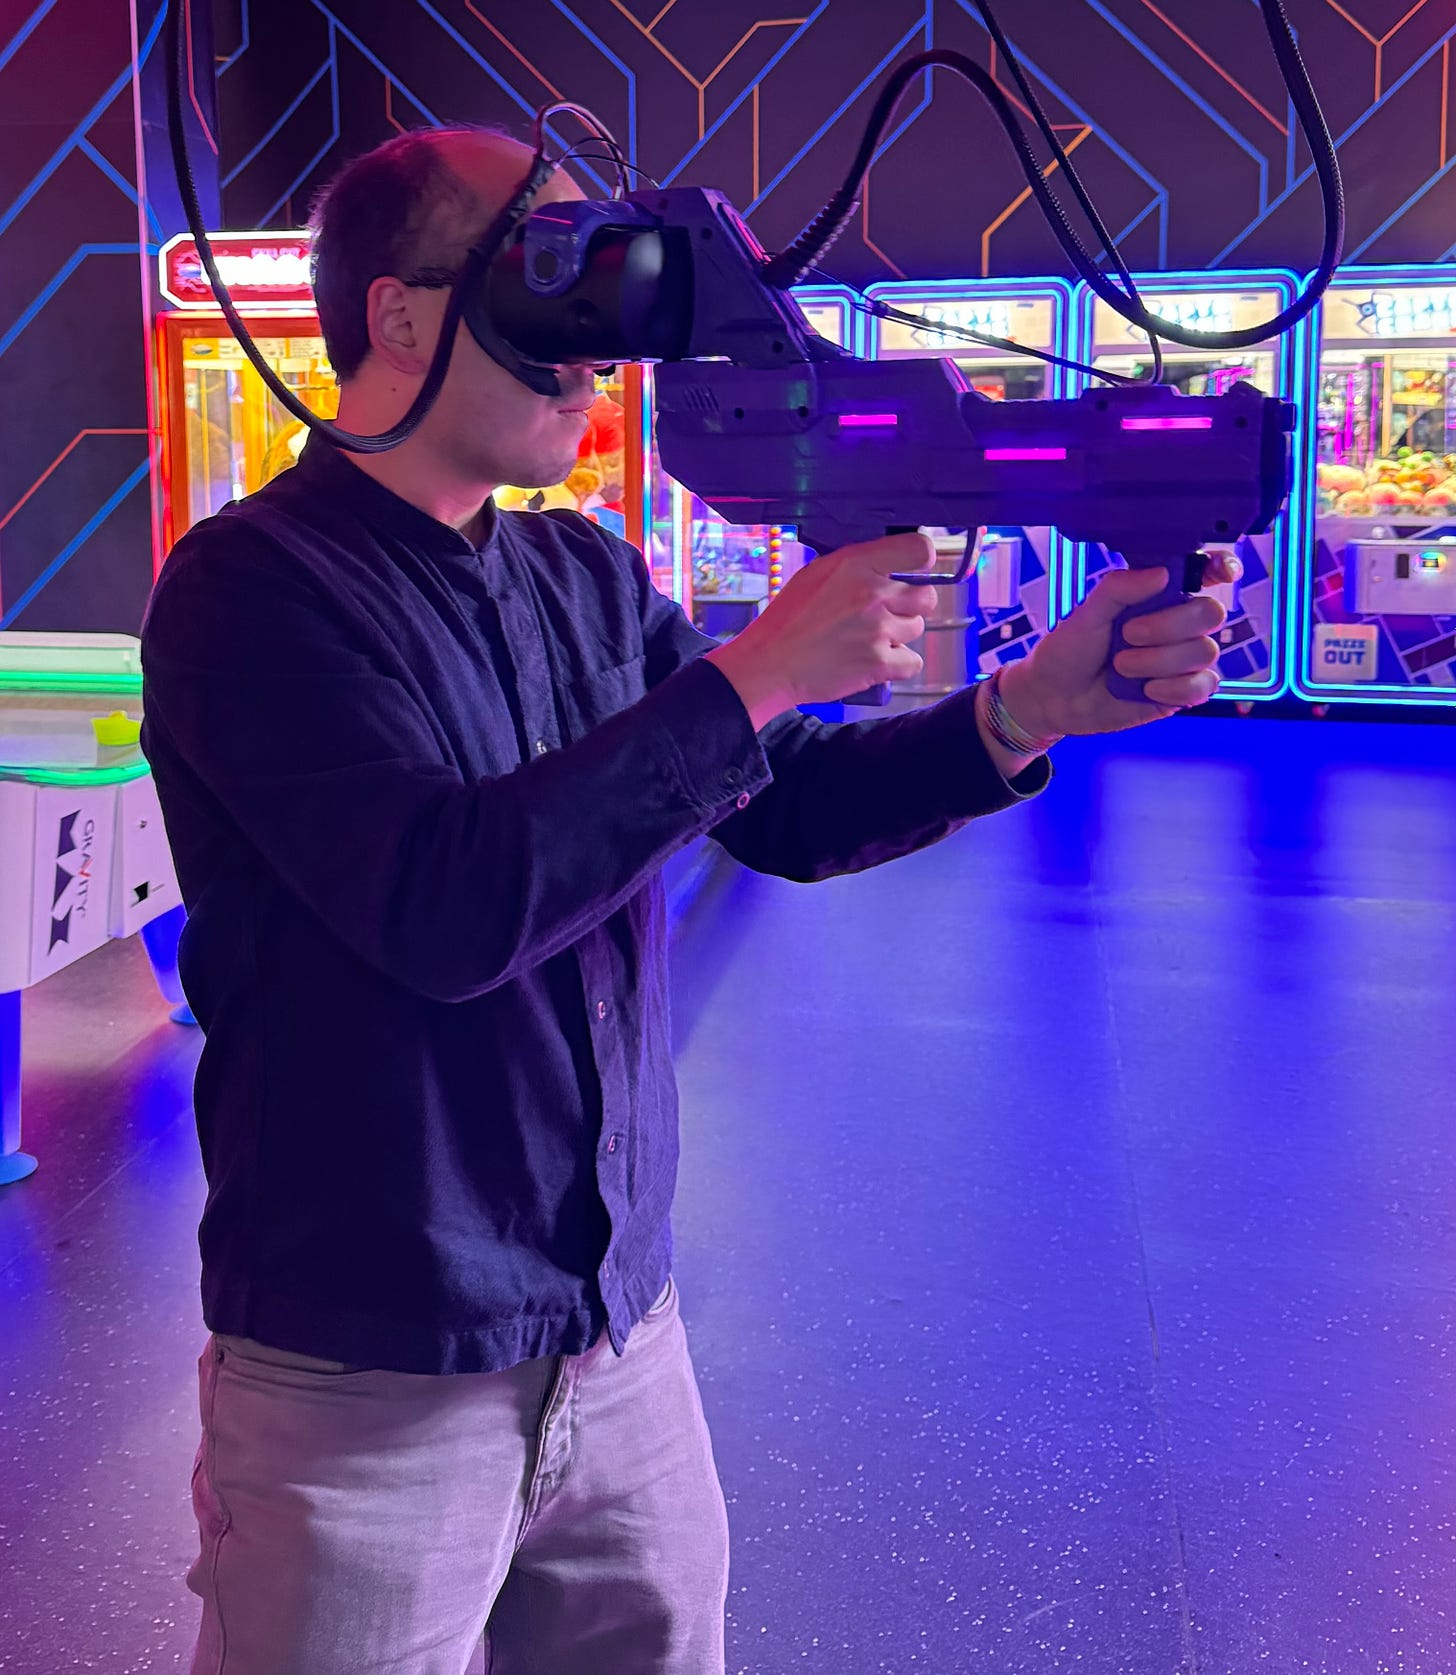 Adrian holds a gun with two hands, both fingers on triggers, with his face pressed against a VR headset embedded in the gun